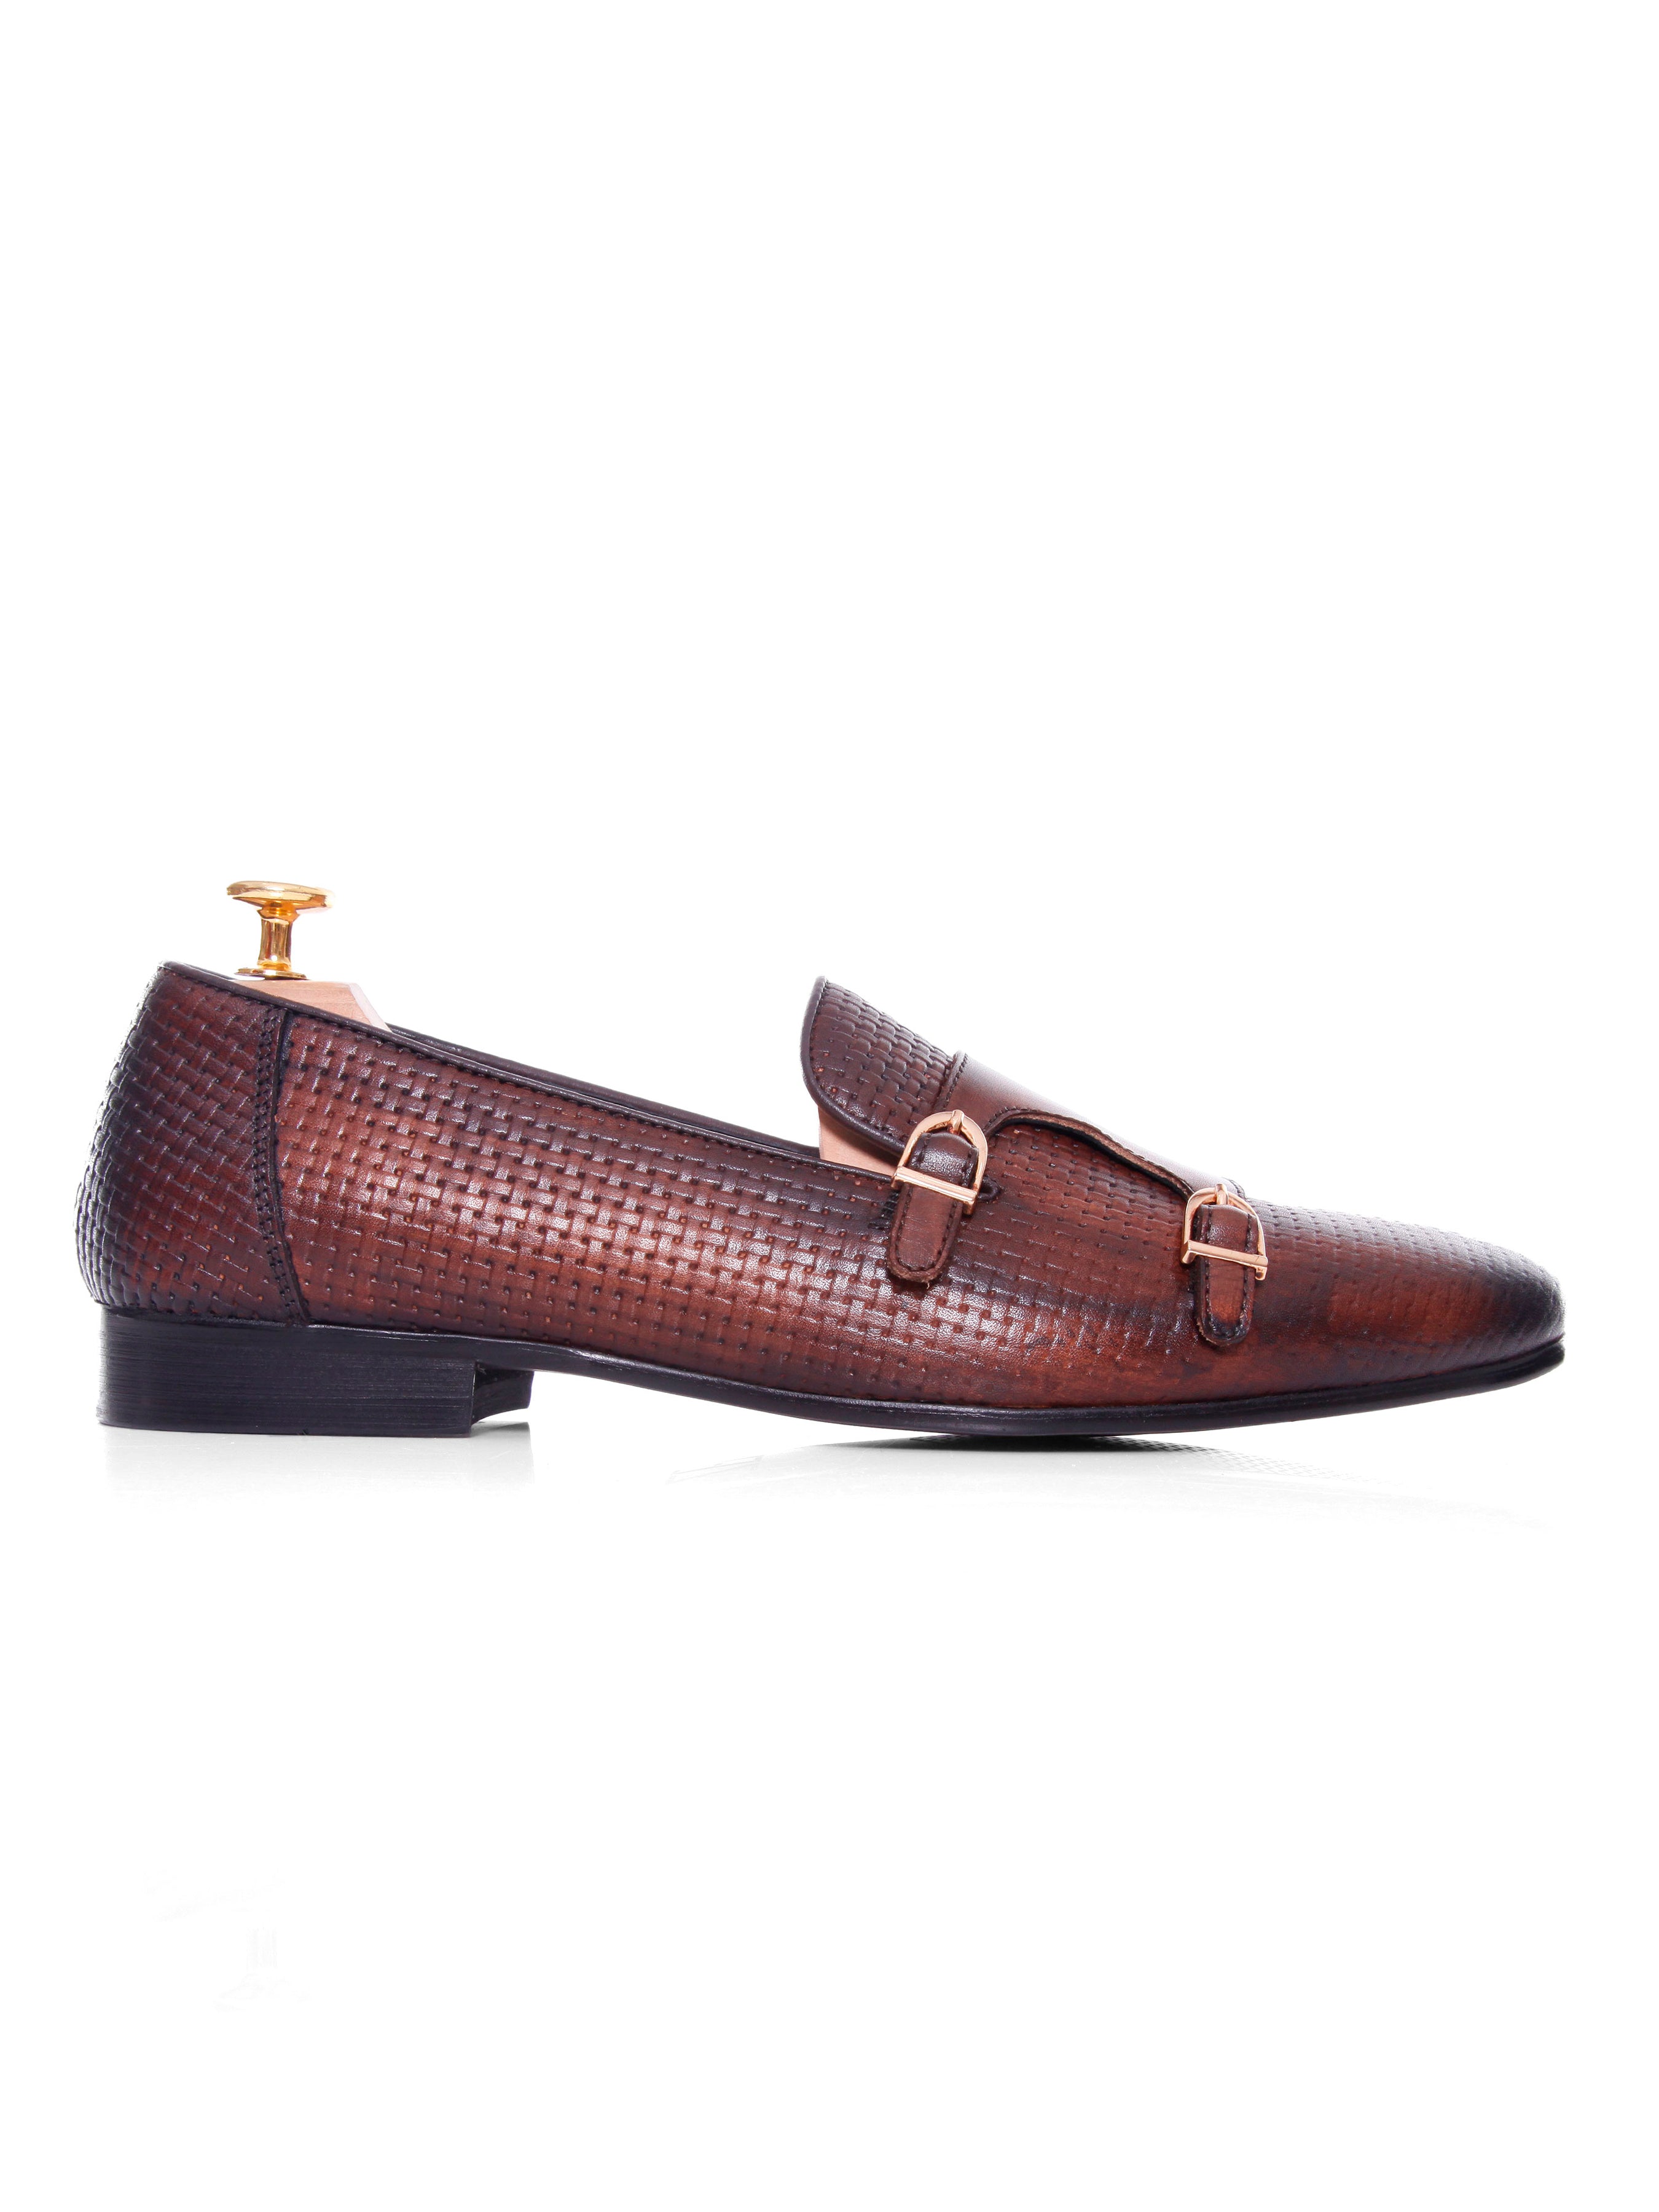 Loafer Slipper - Dark Brown Double Monk Strap with Woven Leather (Hand Painted Patina)